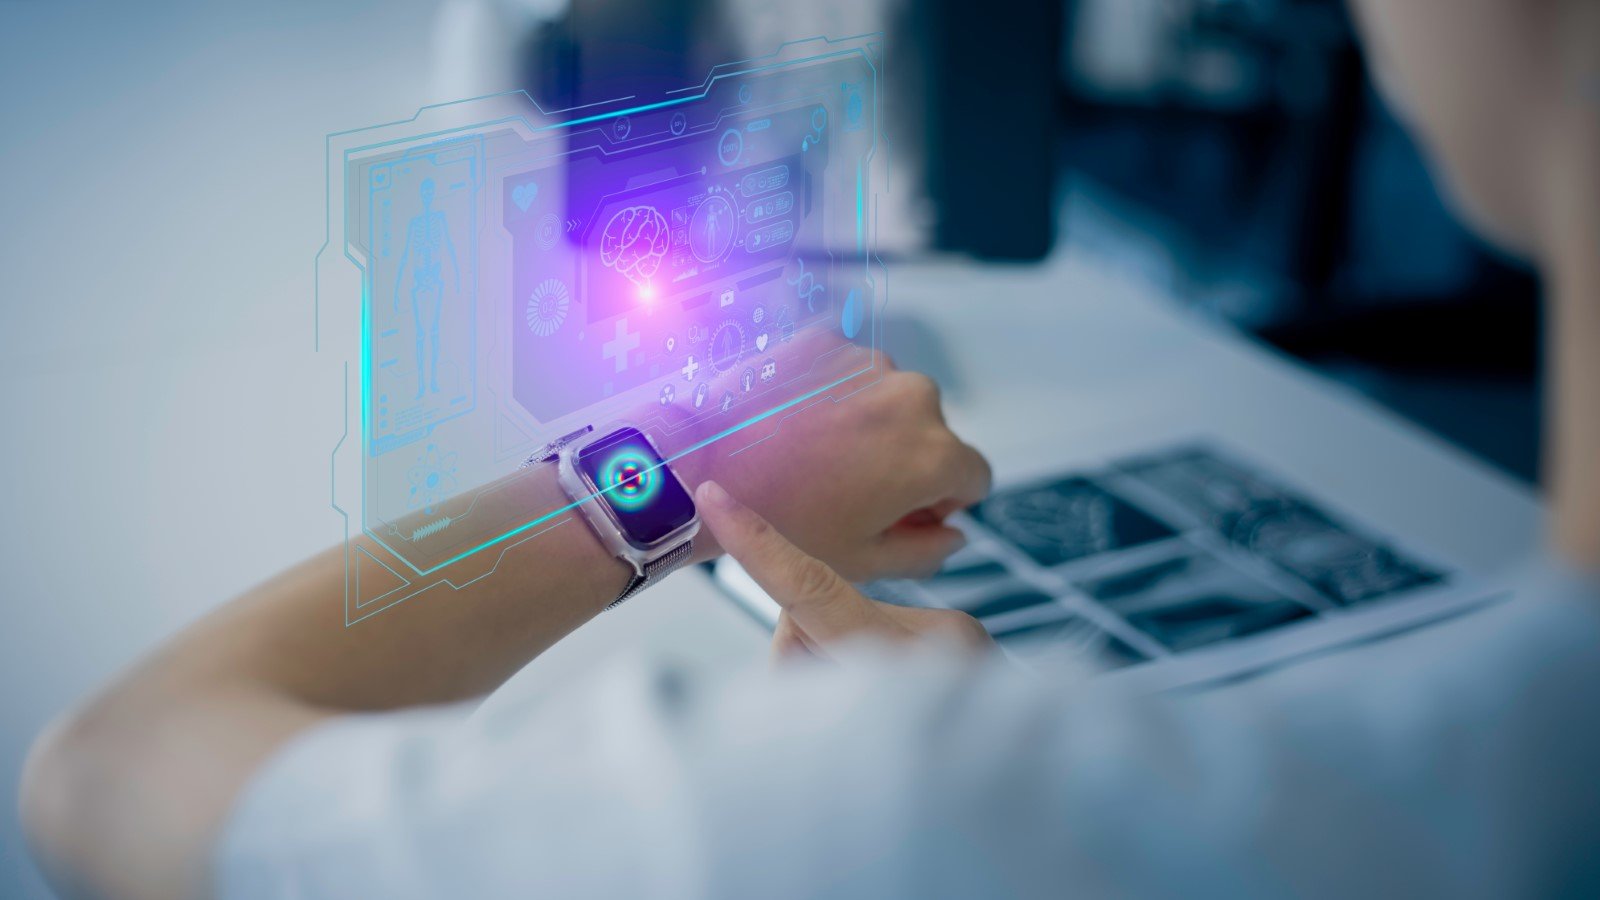 <p><span>From combadges to smart clothing, wearables have been part of sci-fi for decades. Scientists have been working to deliver on the promise of that technology for almost as long, resulting in things like smartwatches and wearable health monitors. </span></p><p><span>Better wearables are coming along fast. </span></p><p><span>California-based company MoJo has been developing smart contact lenses since 2015. Other teams are working on contacts that monitor blood sugar in tears and relay patients’ information via smartphone.</span></p><p><span>Scientists are also developing heart and respiratory system monitors that can be printed onto fabric and worn like bandages.</span></p>